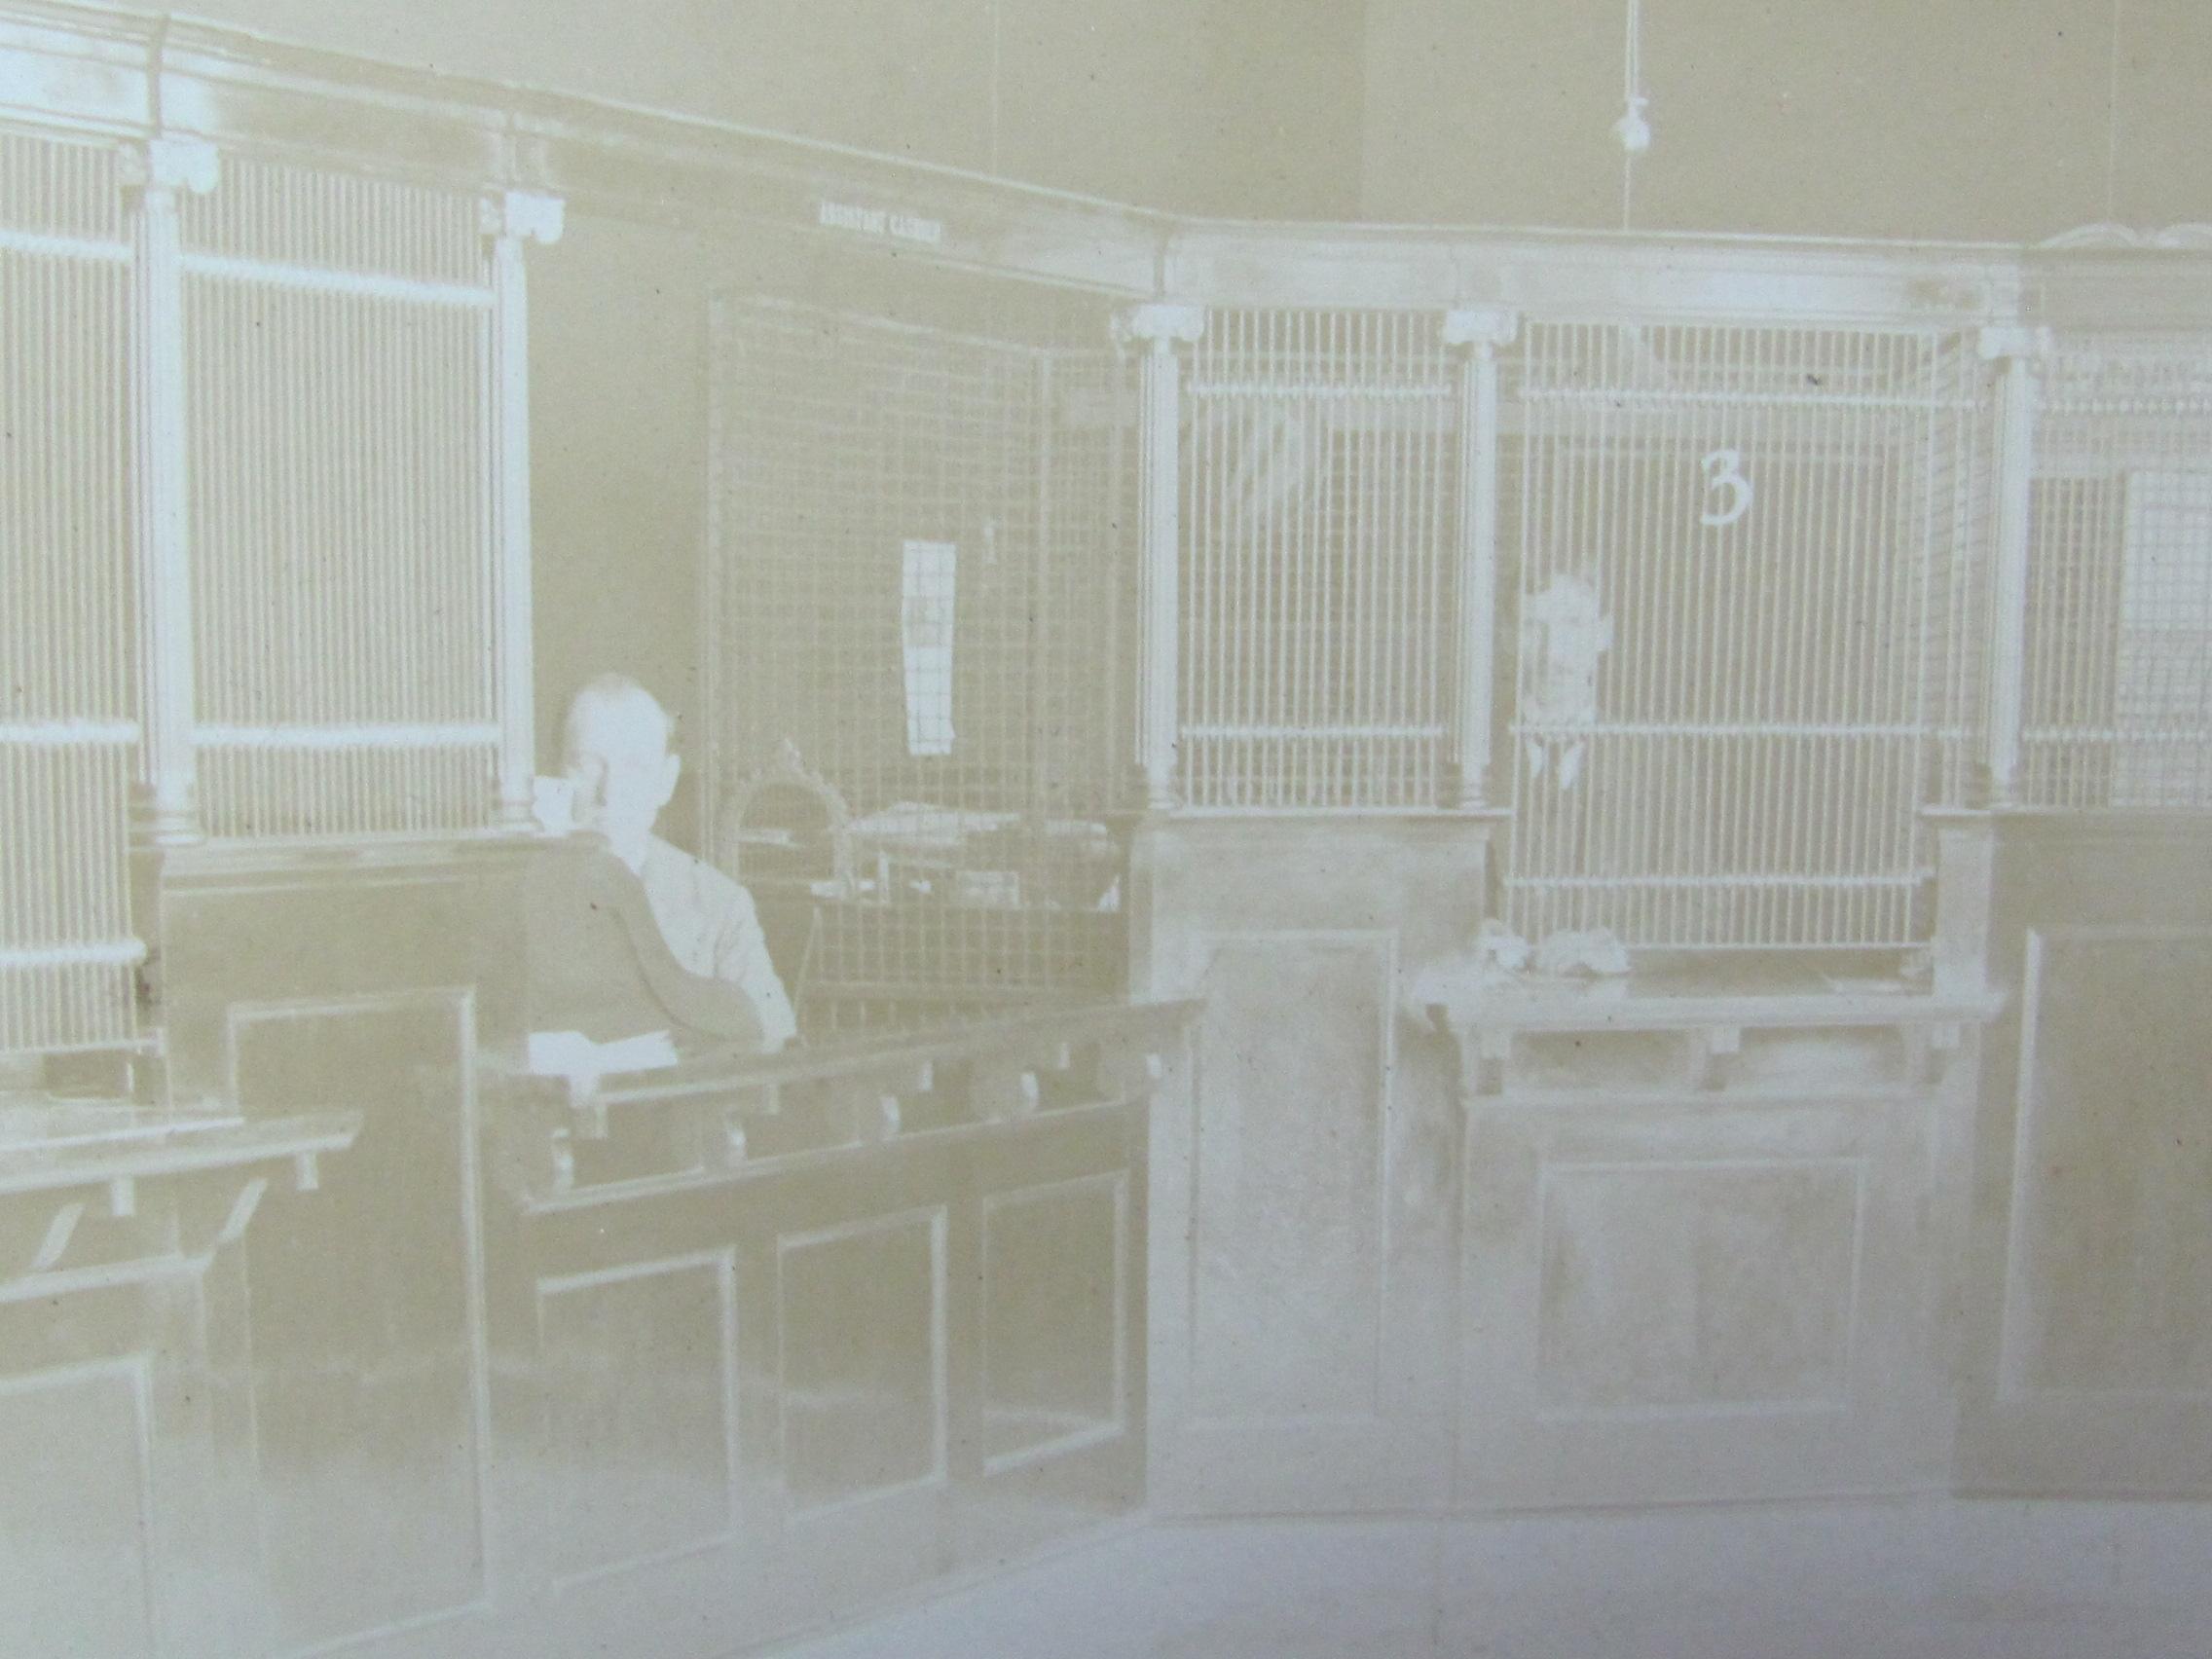 Matted Sepia Photographs – Interior of a Bank with Tellers in Cages – Mat is 22 3/4” long